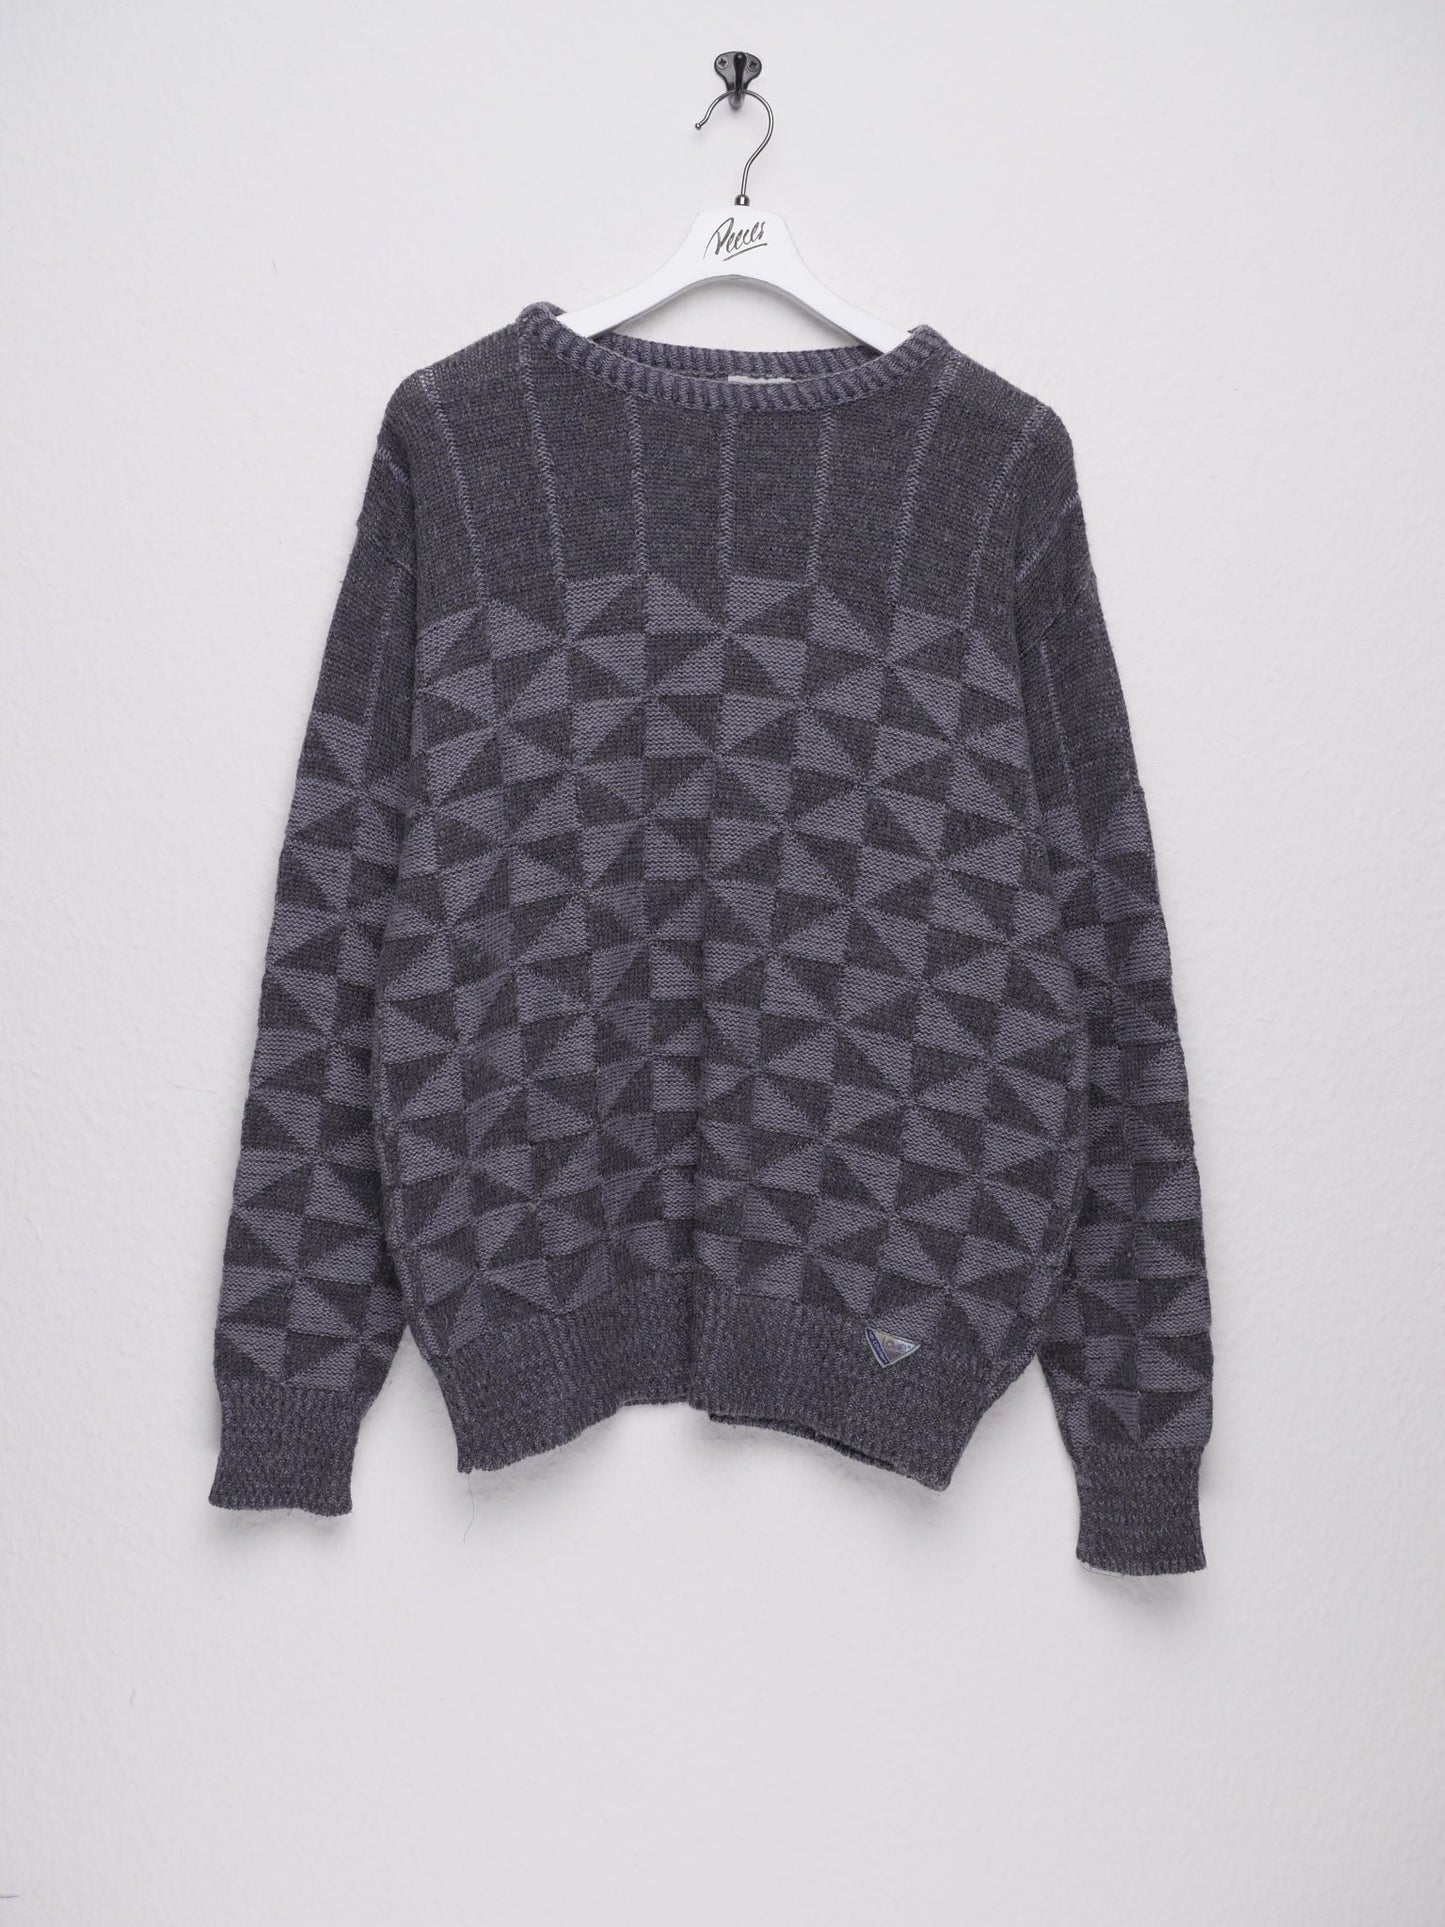 knitted patterned grey Sweater - Peeces